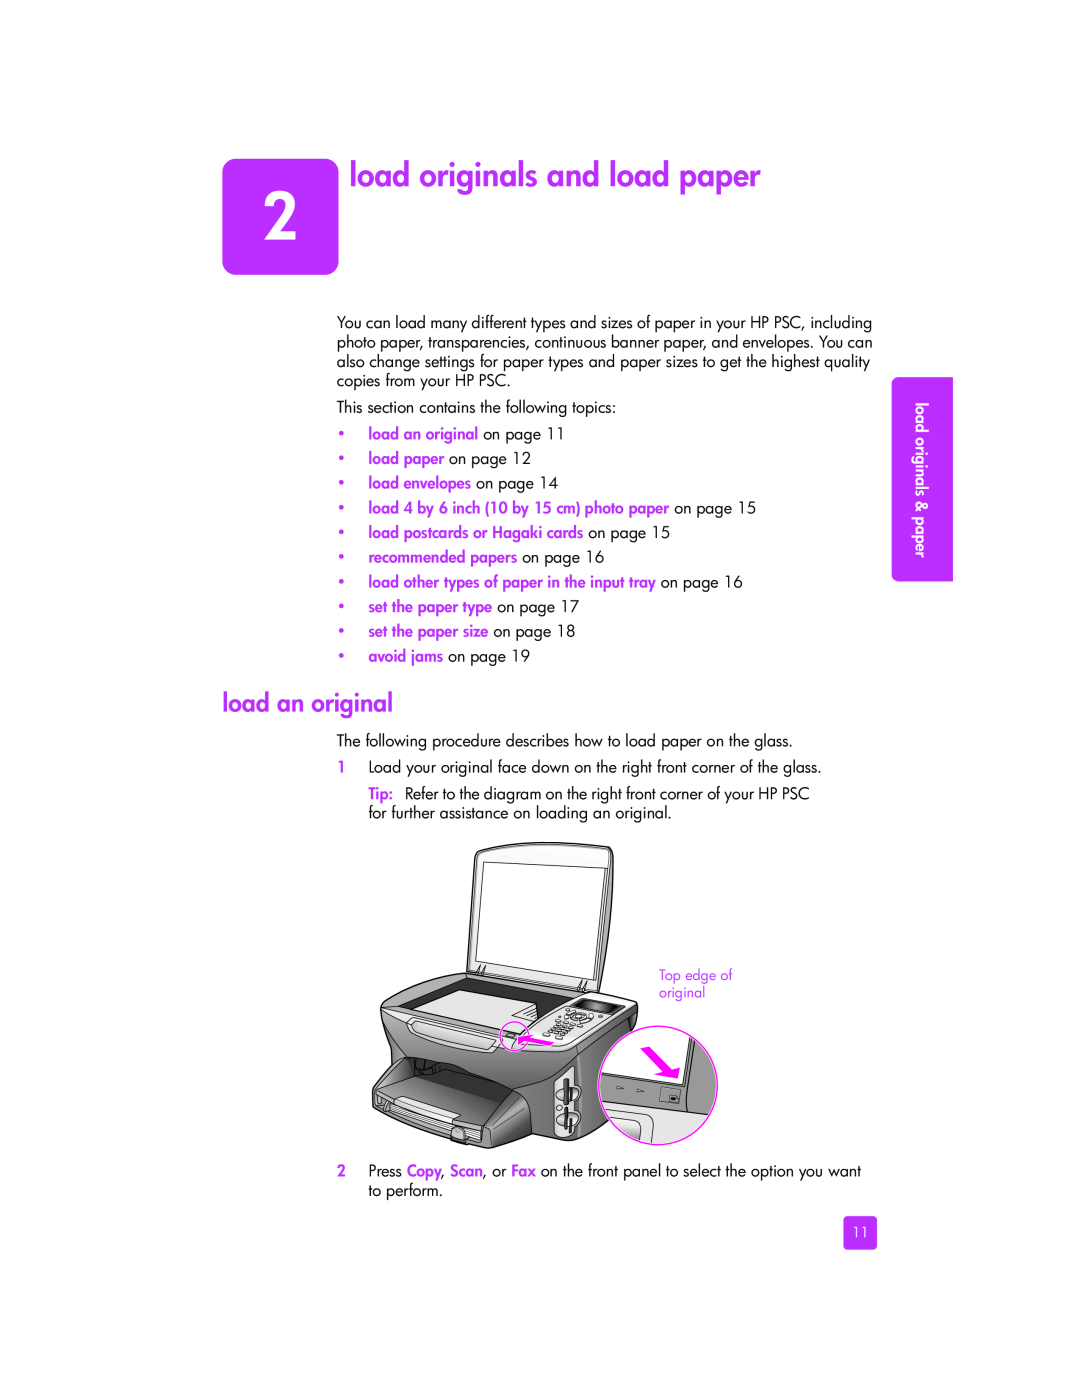 HP 2400 2405 (Q3086A) load originals and load paper, load an original, load 4 by 6 inch 10 by 15 cm photo paper on page 